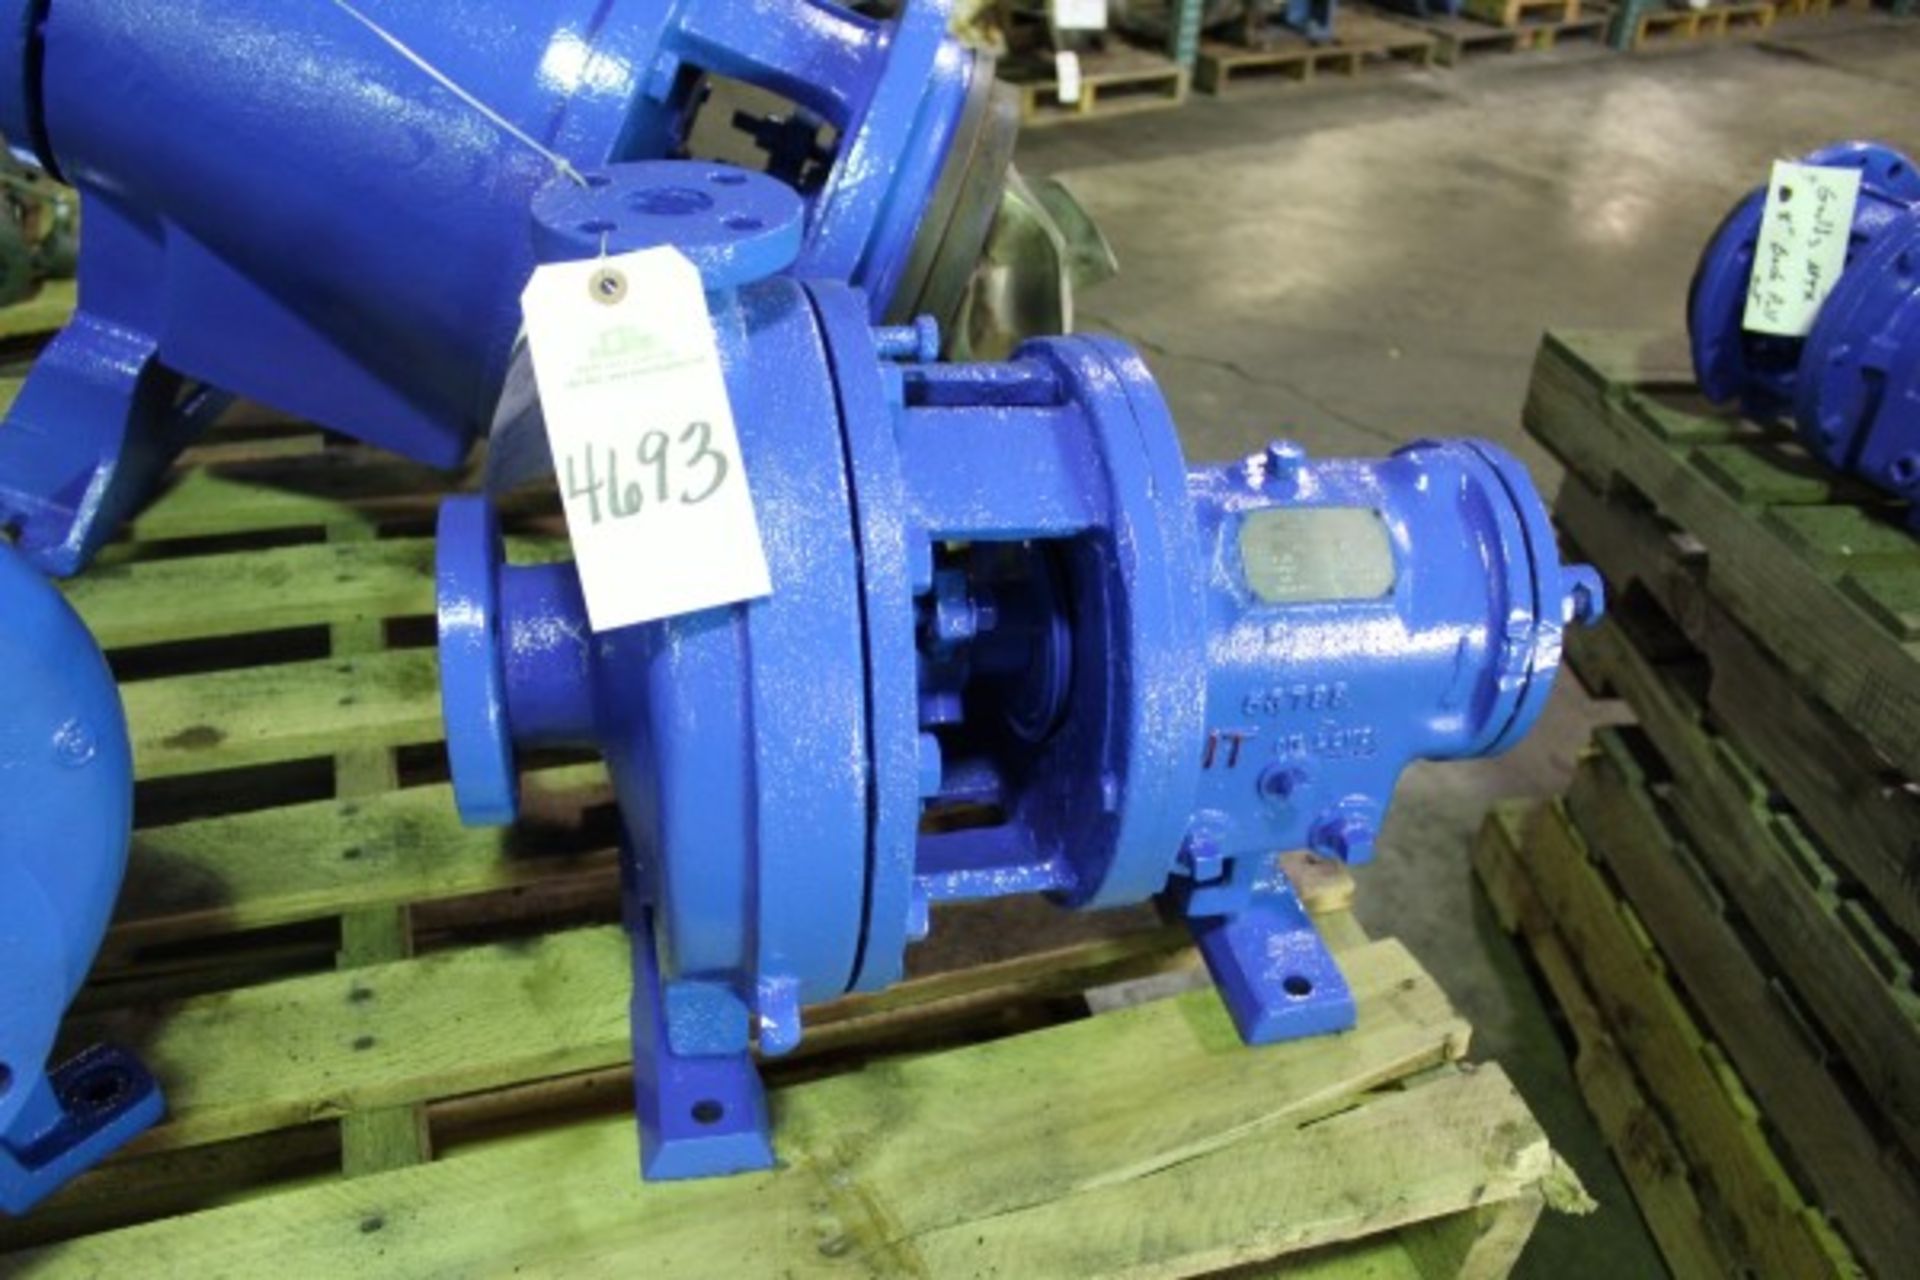 Goulds 1 x 2 x 10 MT Pump | Seller to load for $10 per lot or buyers may remove hand carry items